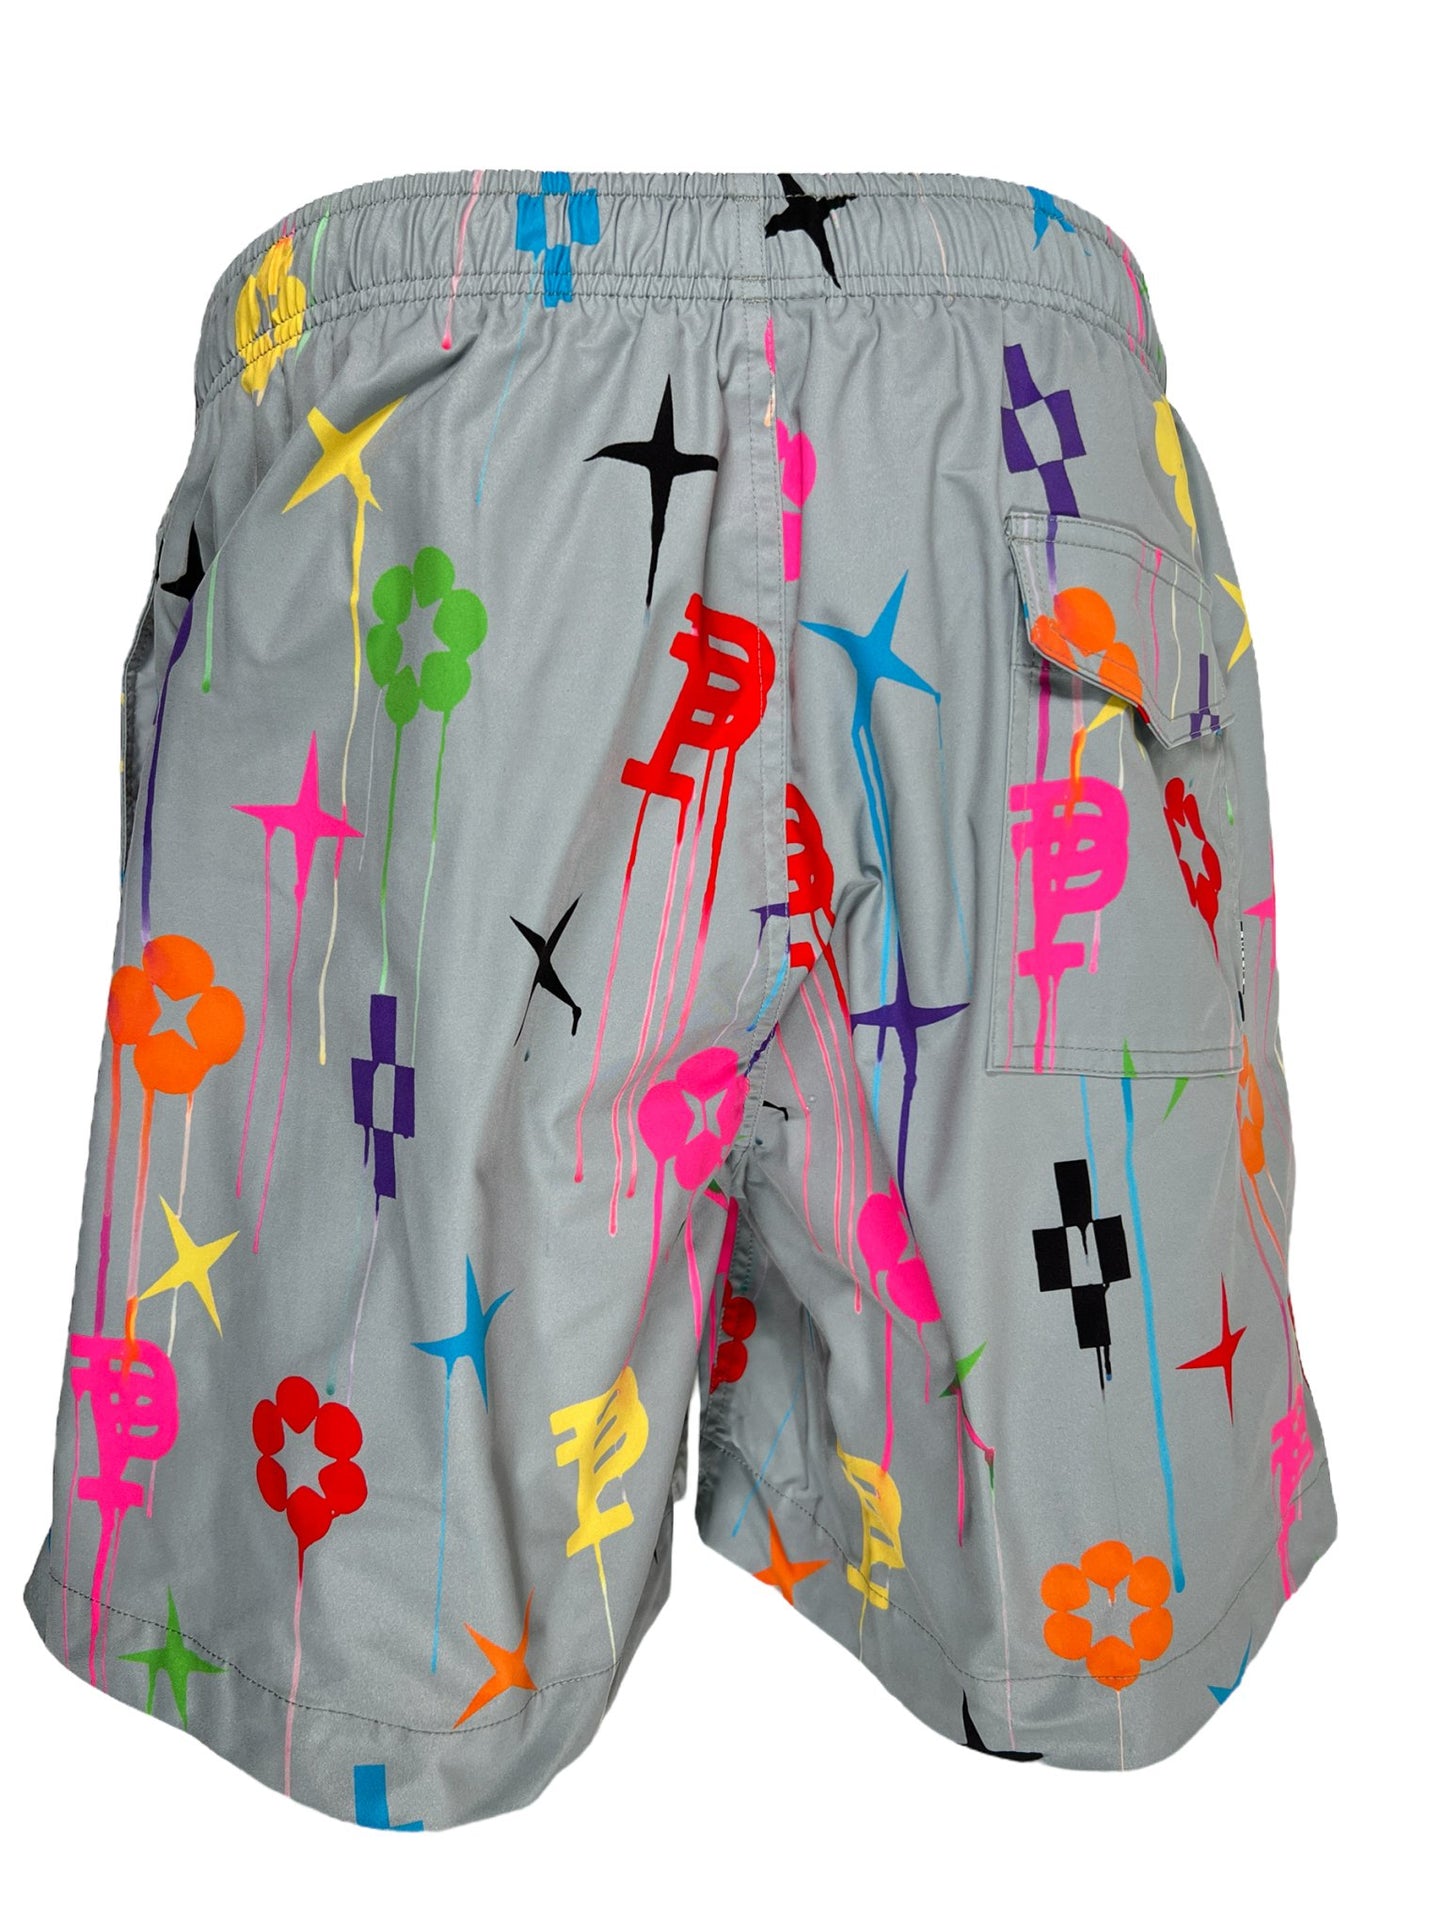 Gray shorts featuring a vibrant print of various symbols, including flowers and abstract shapes. The PURPLE BRAND P504-PGPM ALL ROUND SHORT AOP, part of the PURPLE BRAND collection, have an elastic waistband and a pocket on the right side.